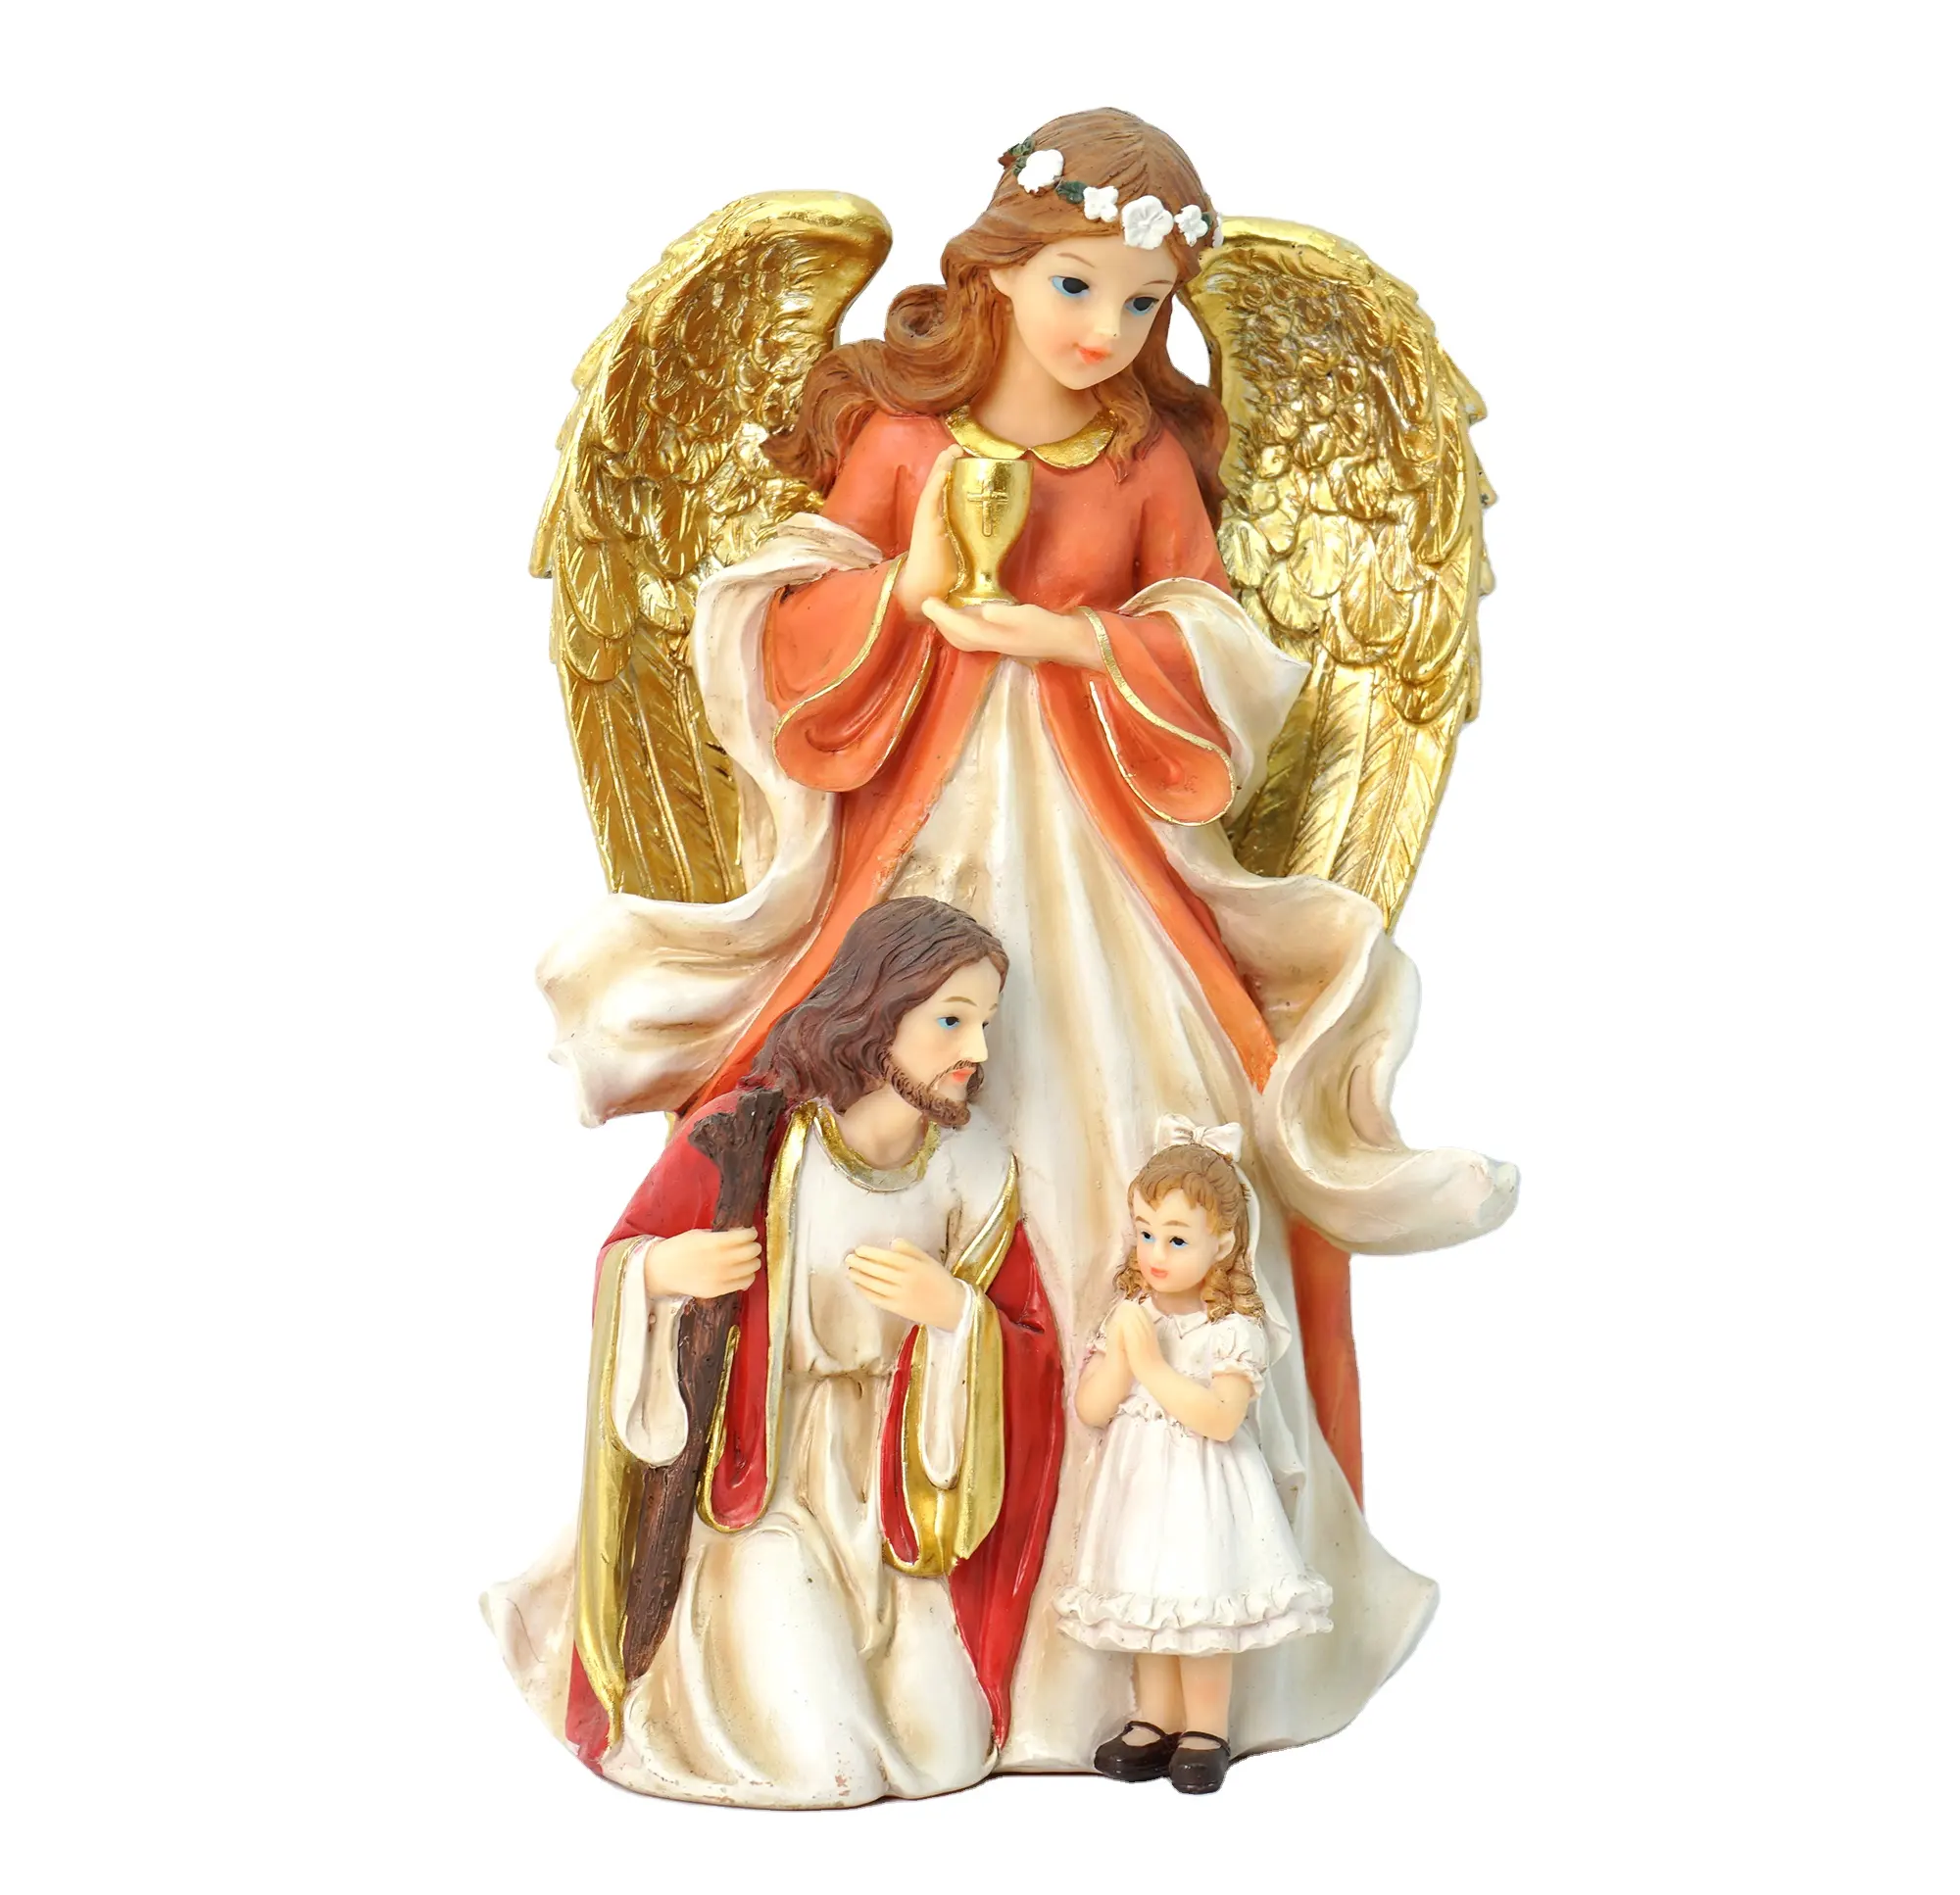 Top Grace Wood grain holy family & guardian angel open arms religious gift decoration durable high-quality resin wood sculpture